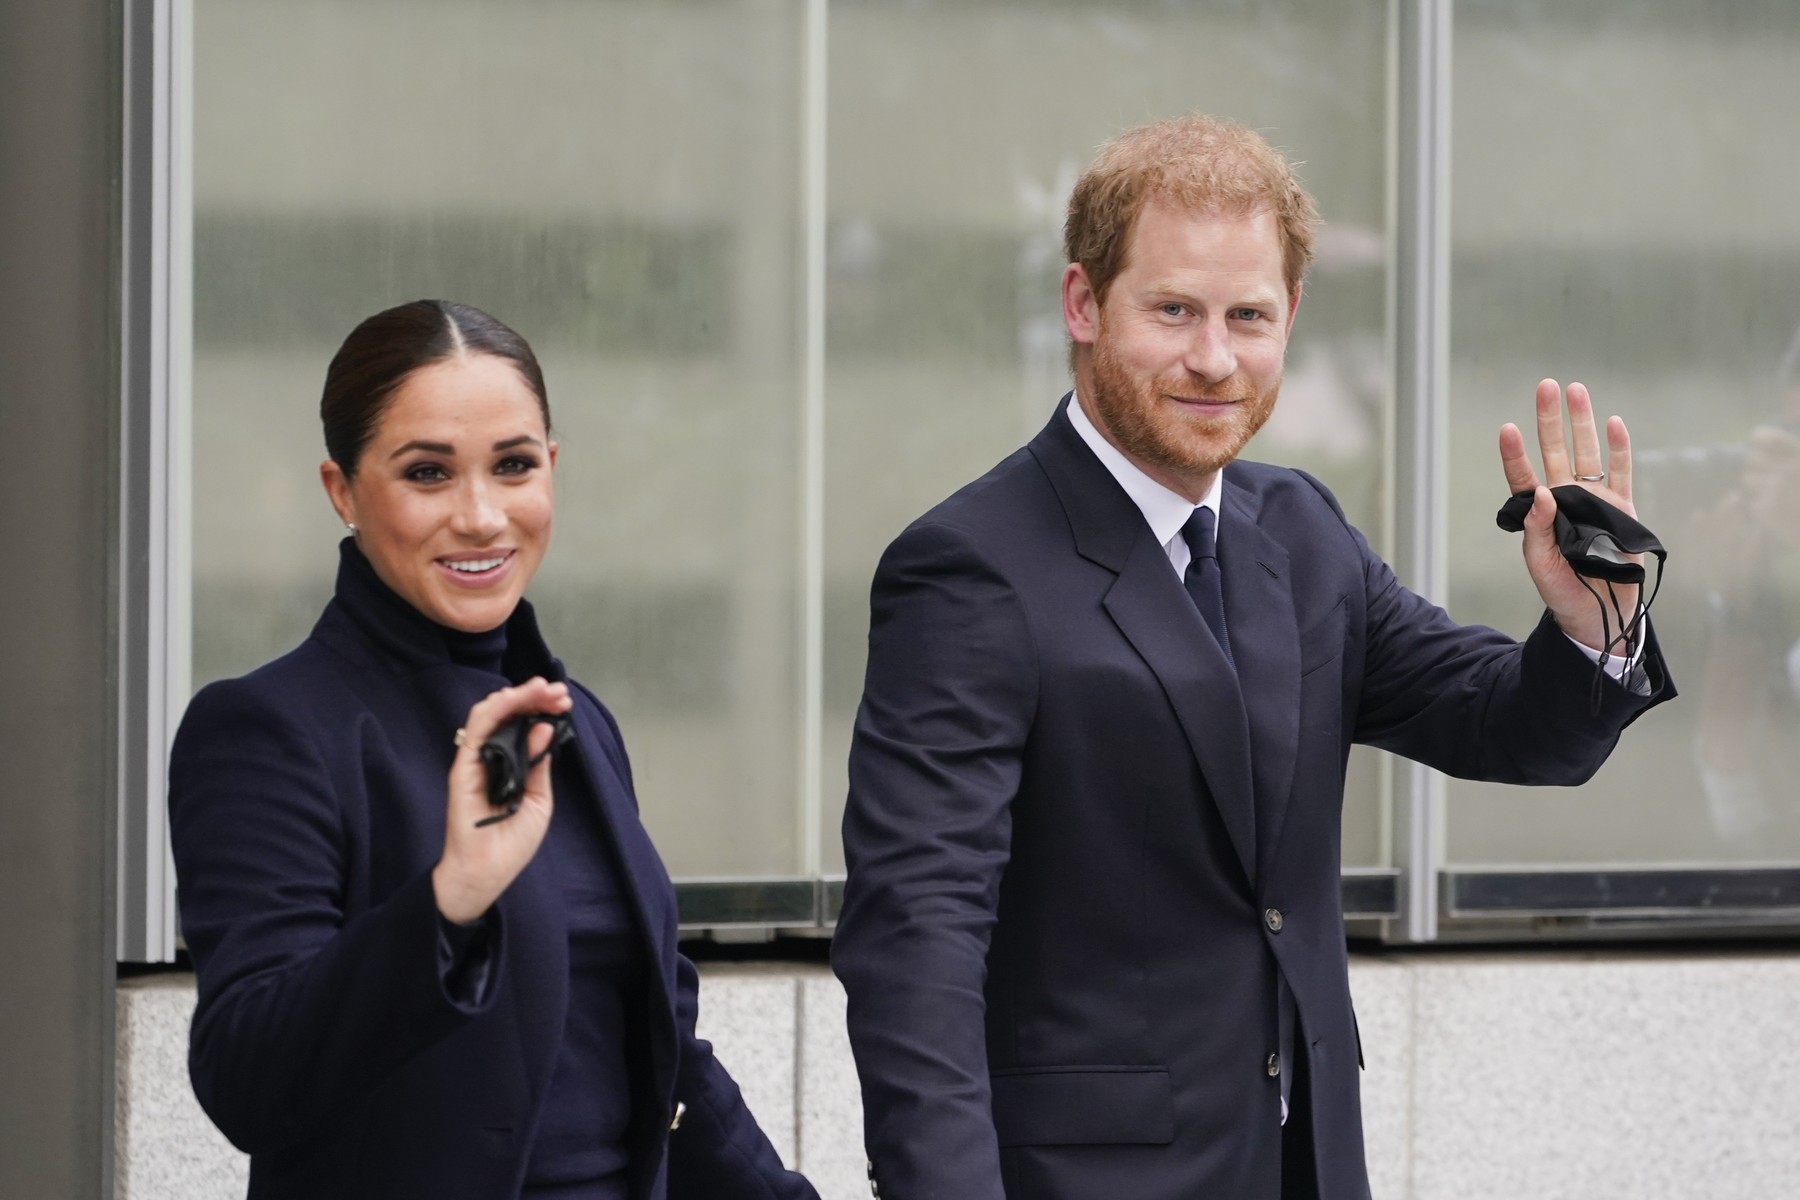 That's all, Buckingham Palace gave its opinion in a rather strange way on the issue of Meghan Markle and Prince Harry